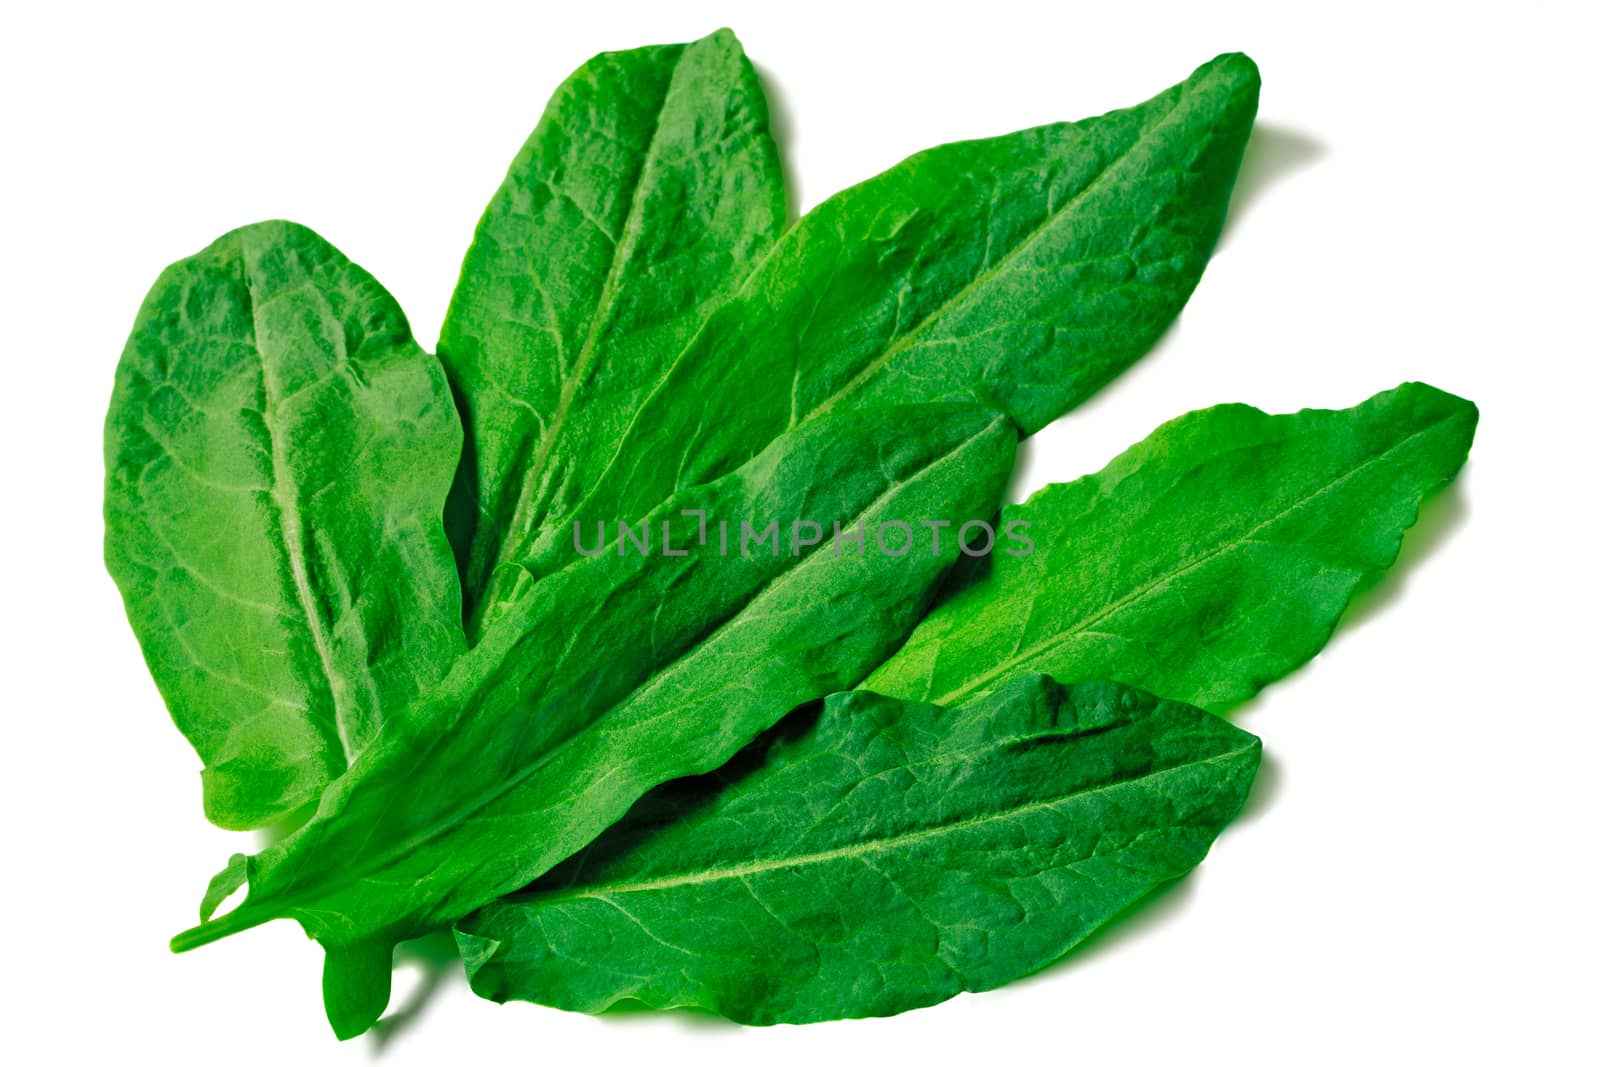 Green leaves of spinach on a white background by georgina198